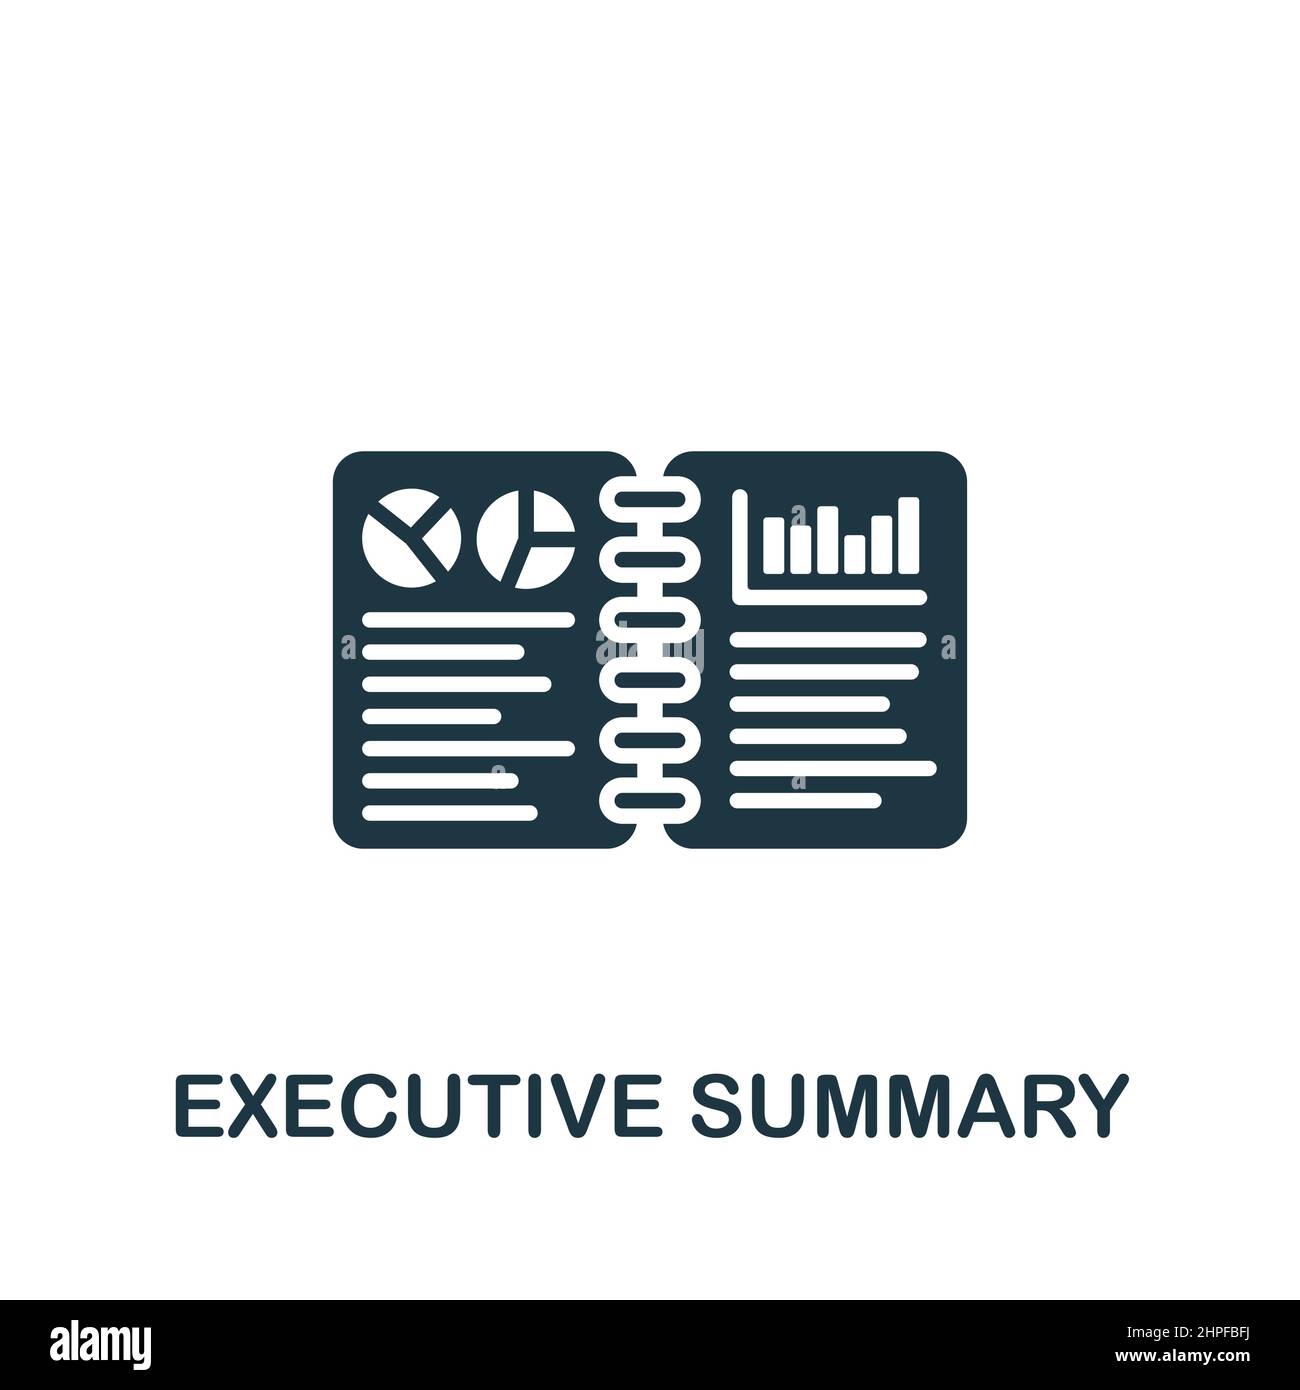 Executive Summary icon. Monochrome simple icon for templates, web design and infographics Stock Vector